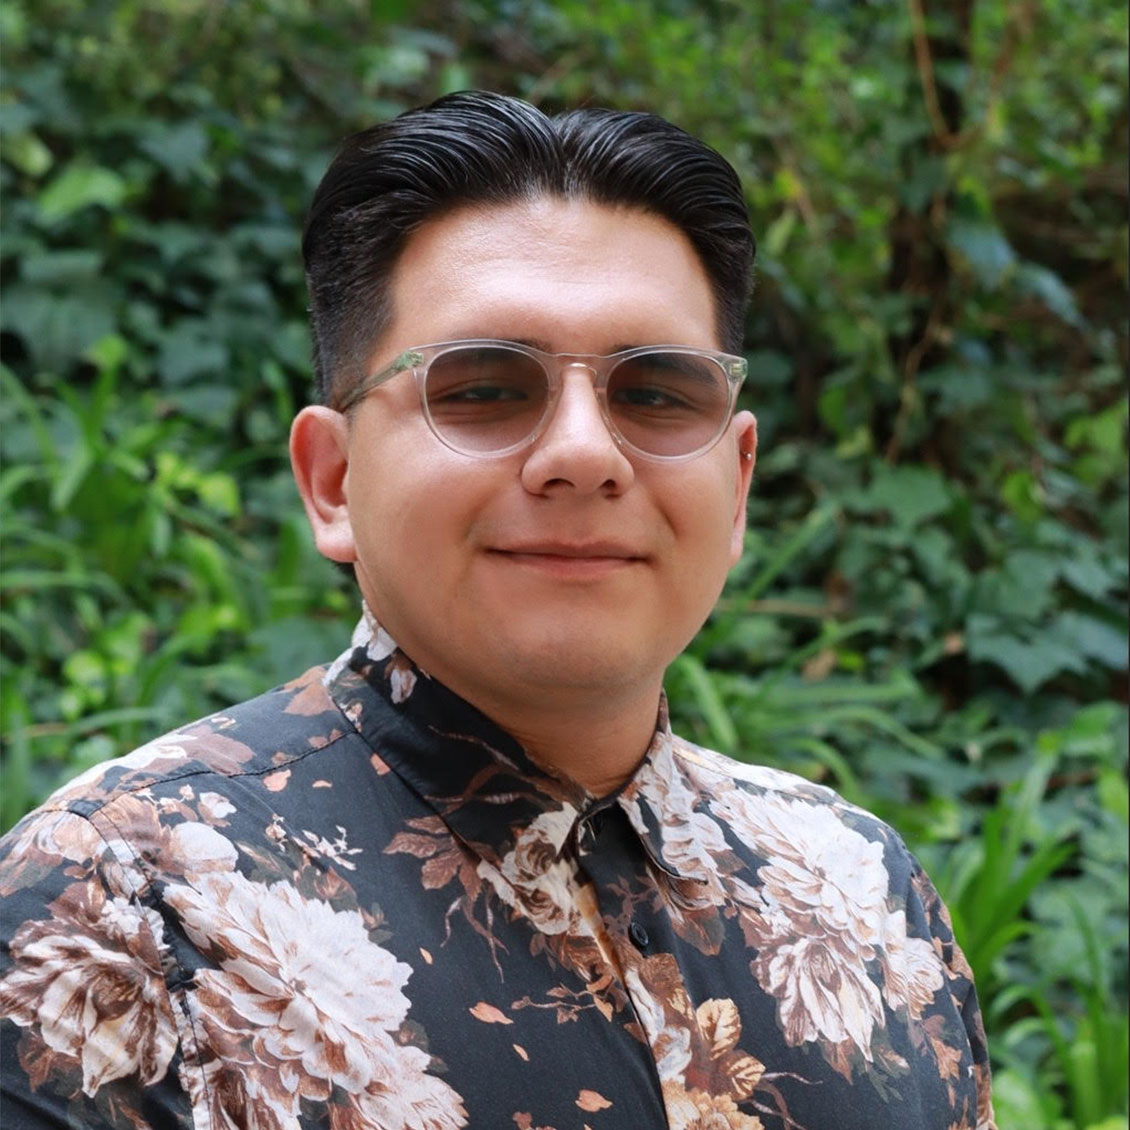 Headshot of scholar. Green plants behind scholar. Scholar has thick black short hair. Wearing a button up black floral shirt with brown and light brown flowers. Is wearing white shaded glasses that are oval shaped.